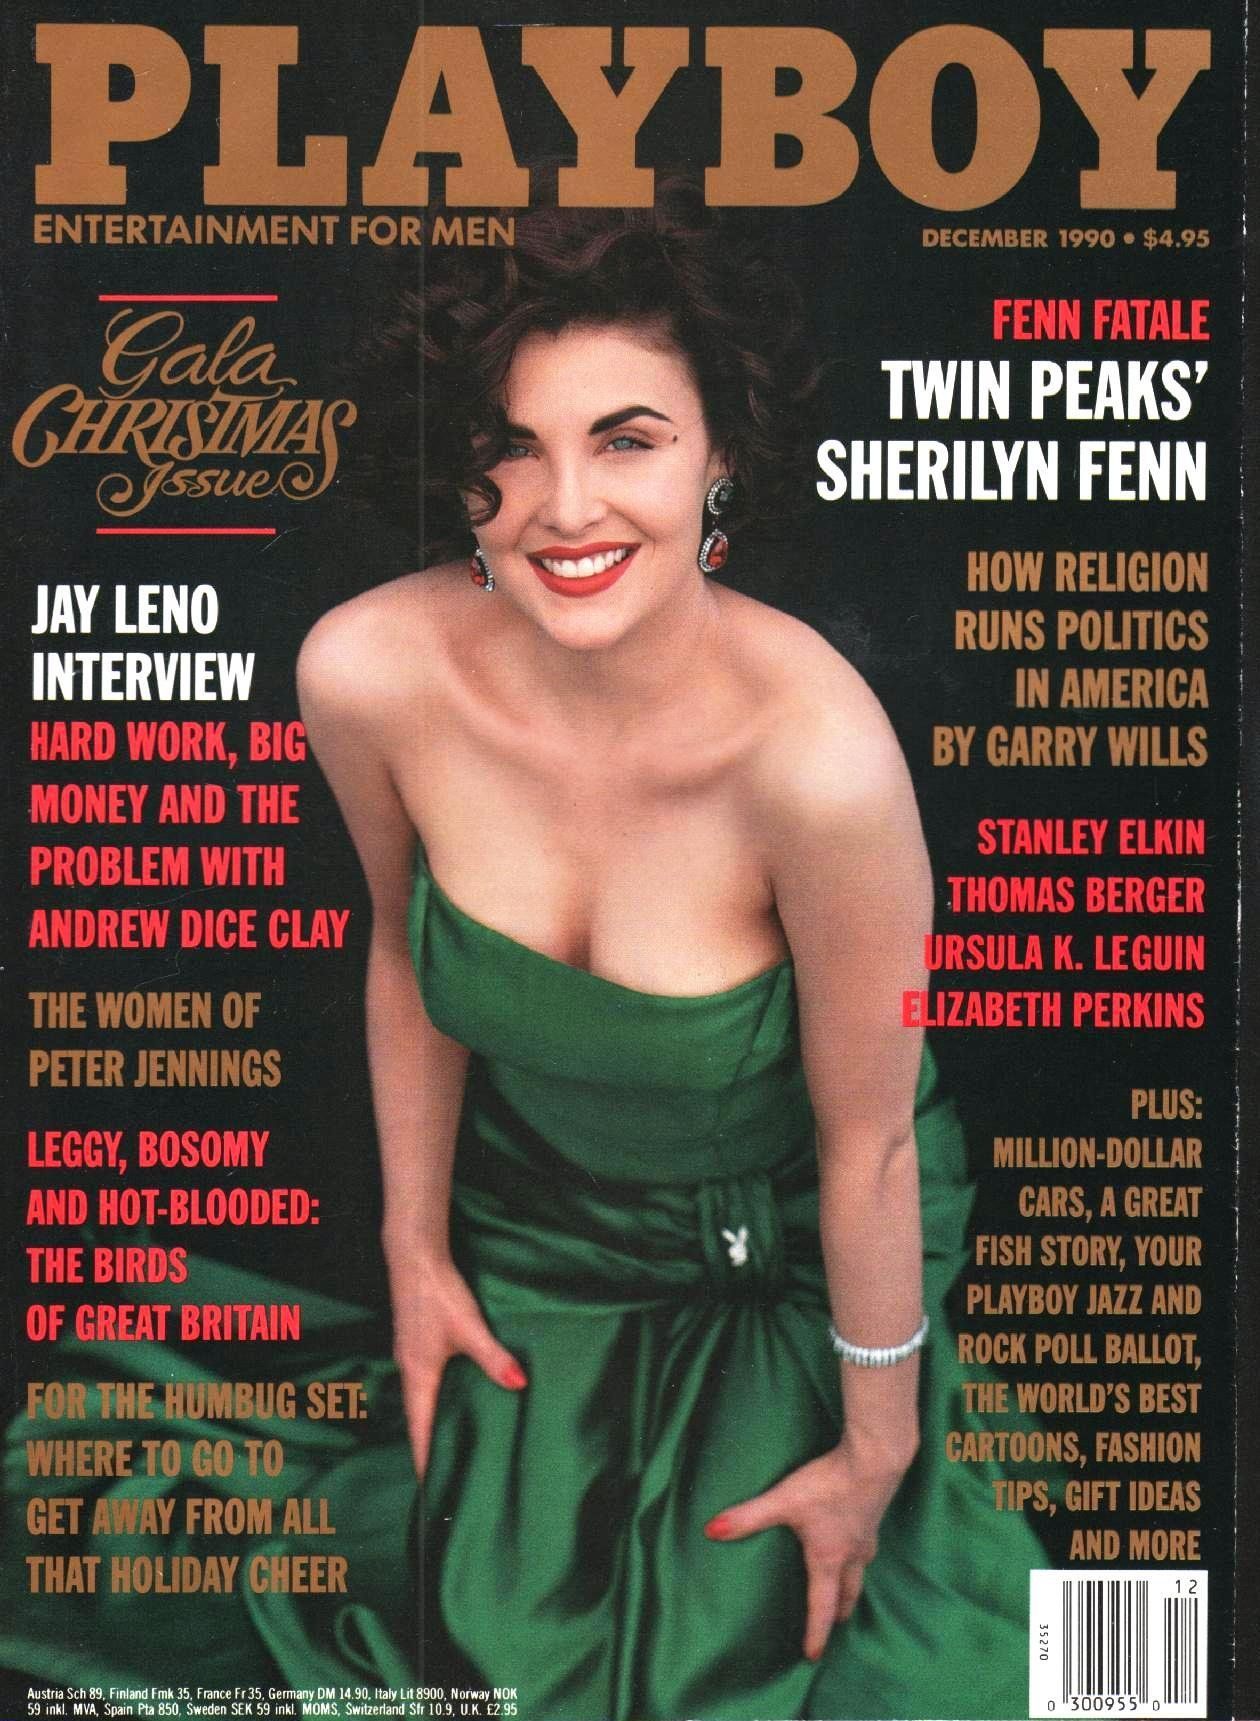 Vintage Finnish Forbidden Porn Magazine - 59 Celebrities Who Posed for Playboy - Celebrity Playboy Covers